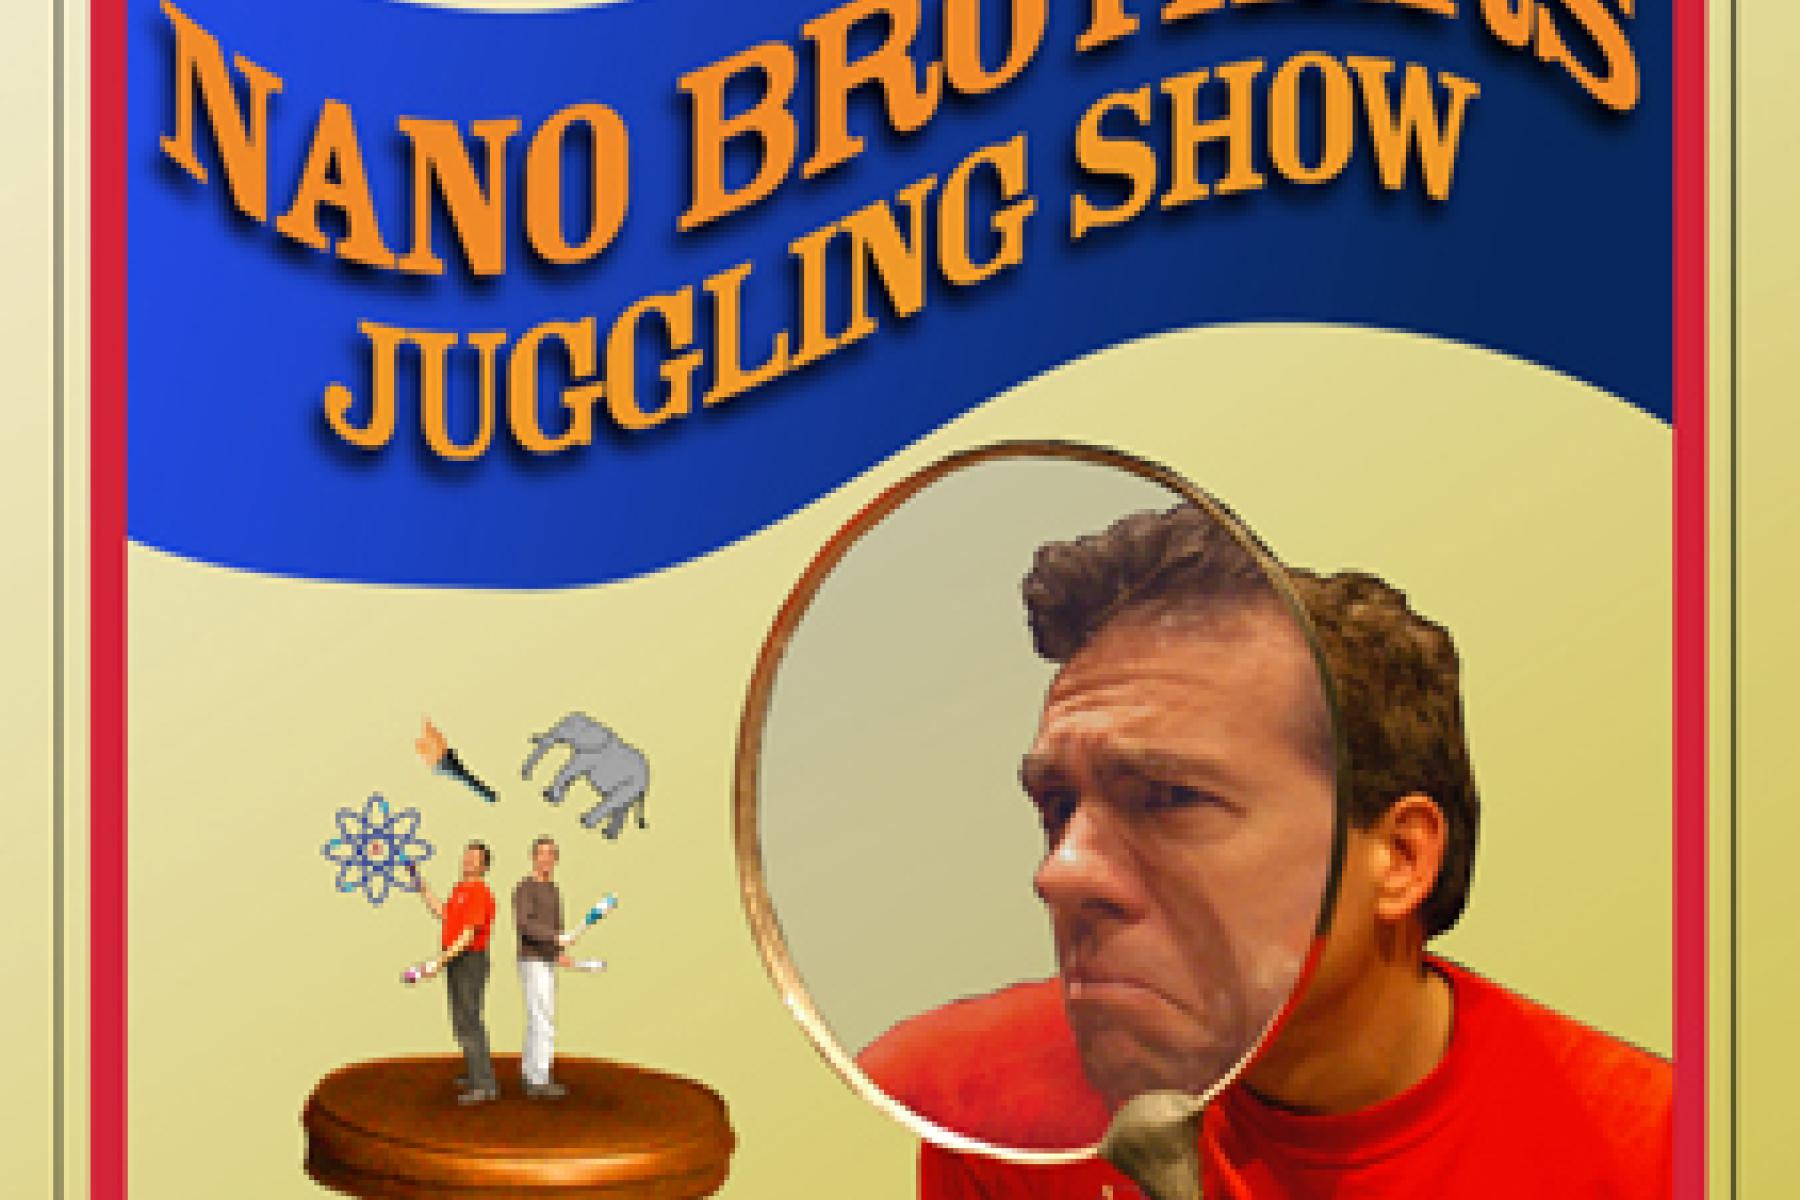 Amazing Juggling Nano Brothers show poster featuring a man holding a magnifying glass while observing small scaled characters on a stool